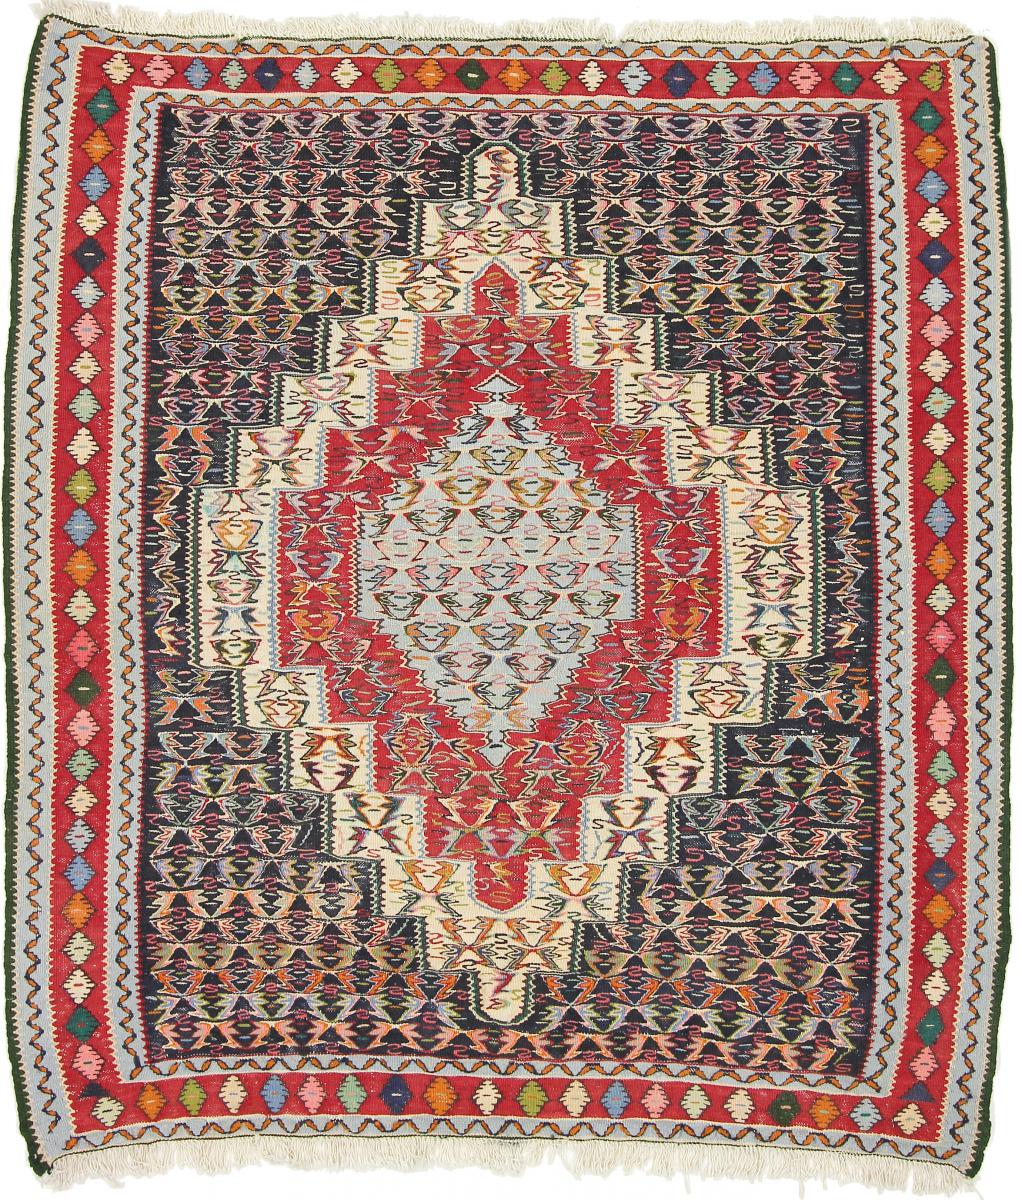 Persian Rug Kilim Senneh 4'10"x4'4" 4'10"x4'4", Persian Rug Knotted by hand